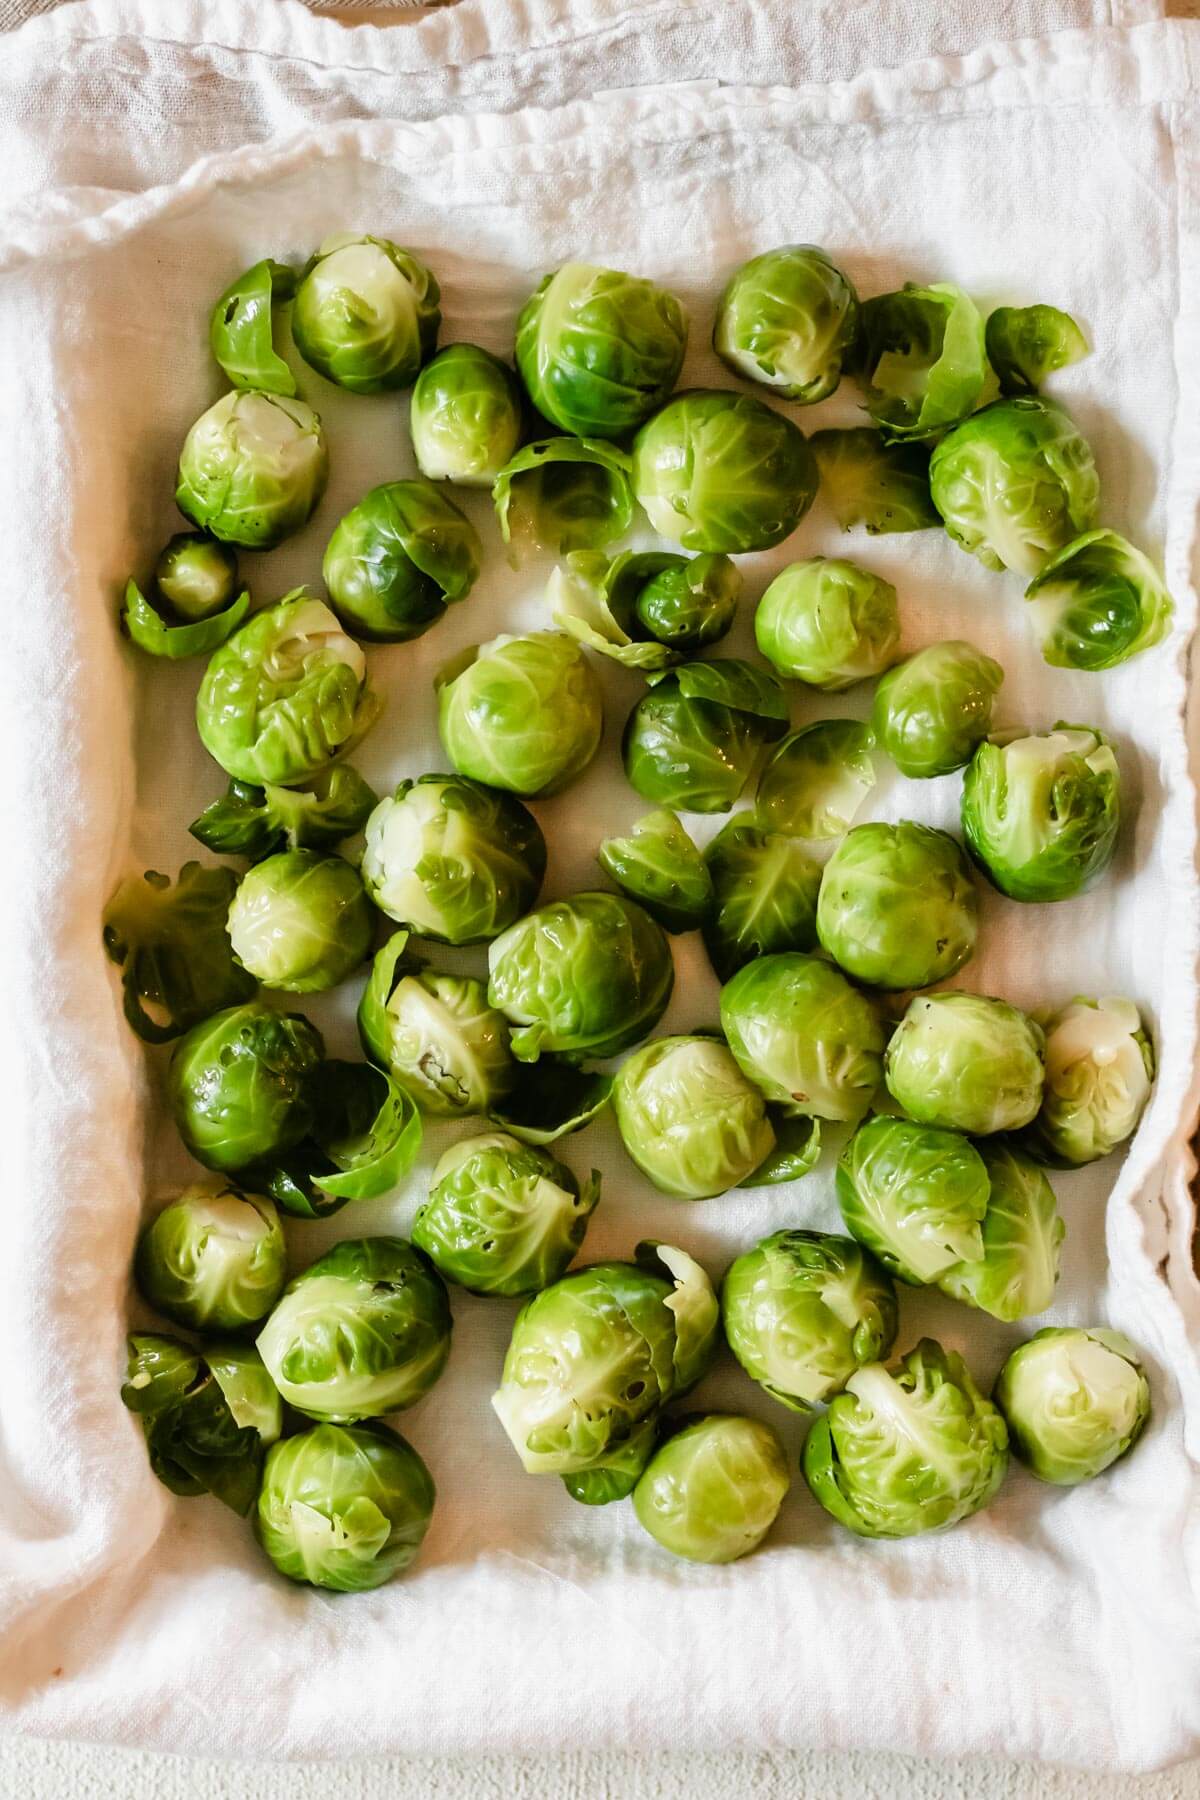 drying brussels sprouts on a clean kitchen towel